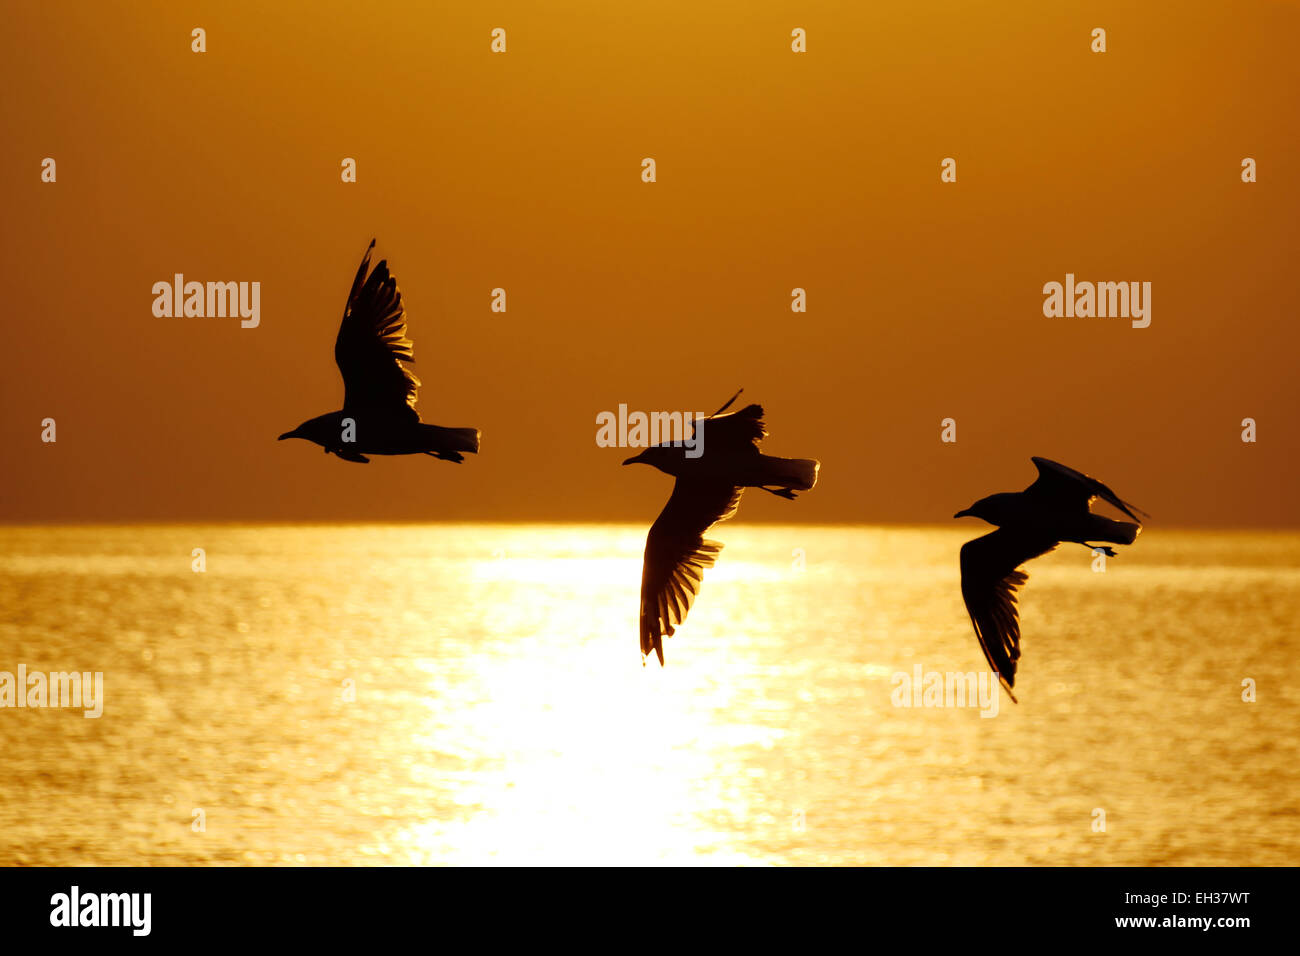 Silhouette of the flying seagull Stock Photo